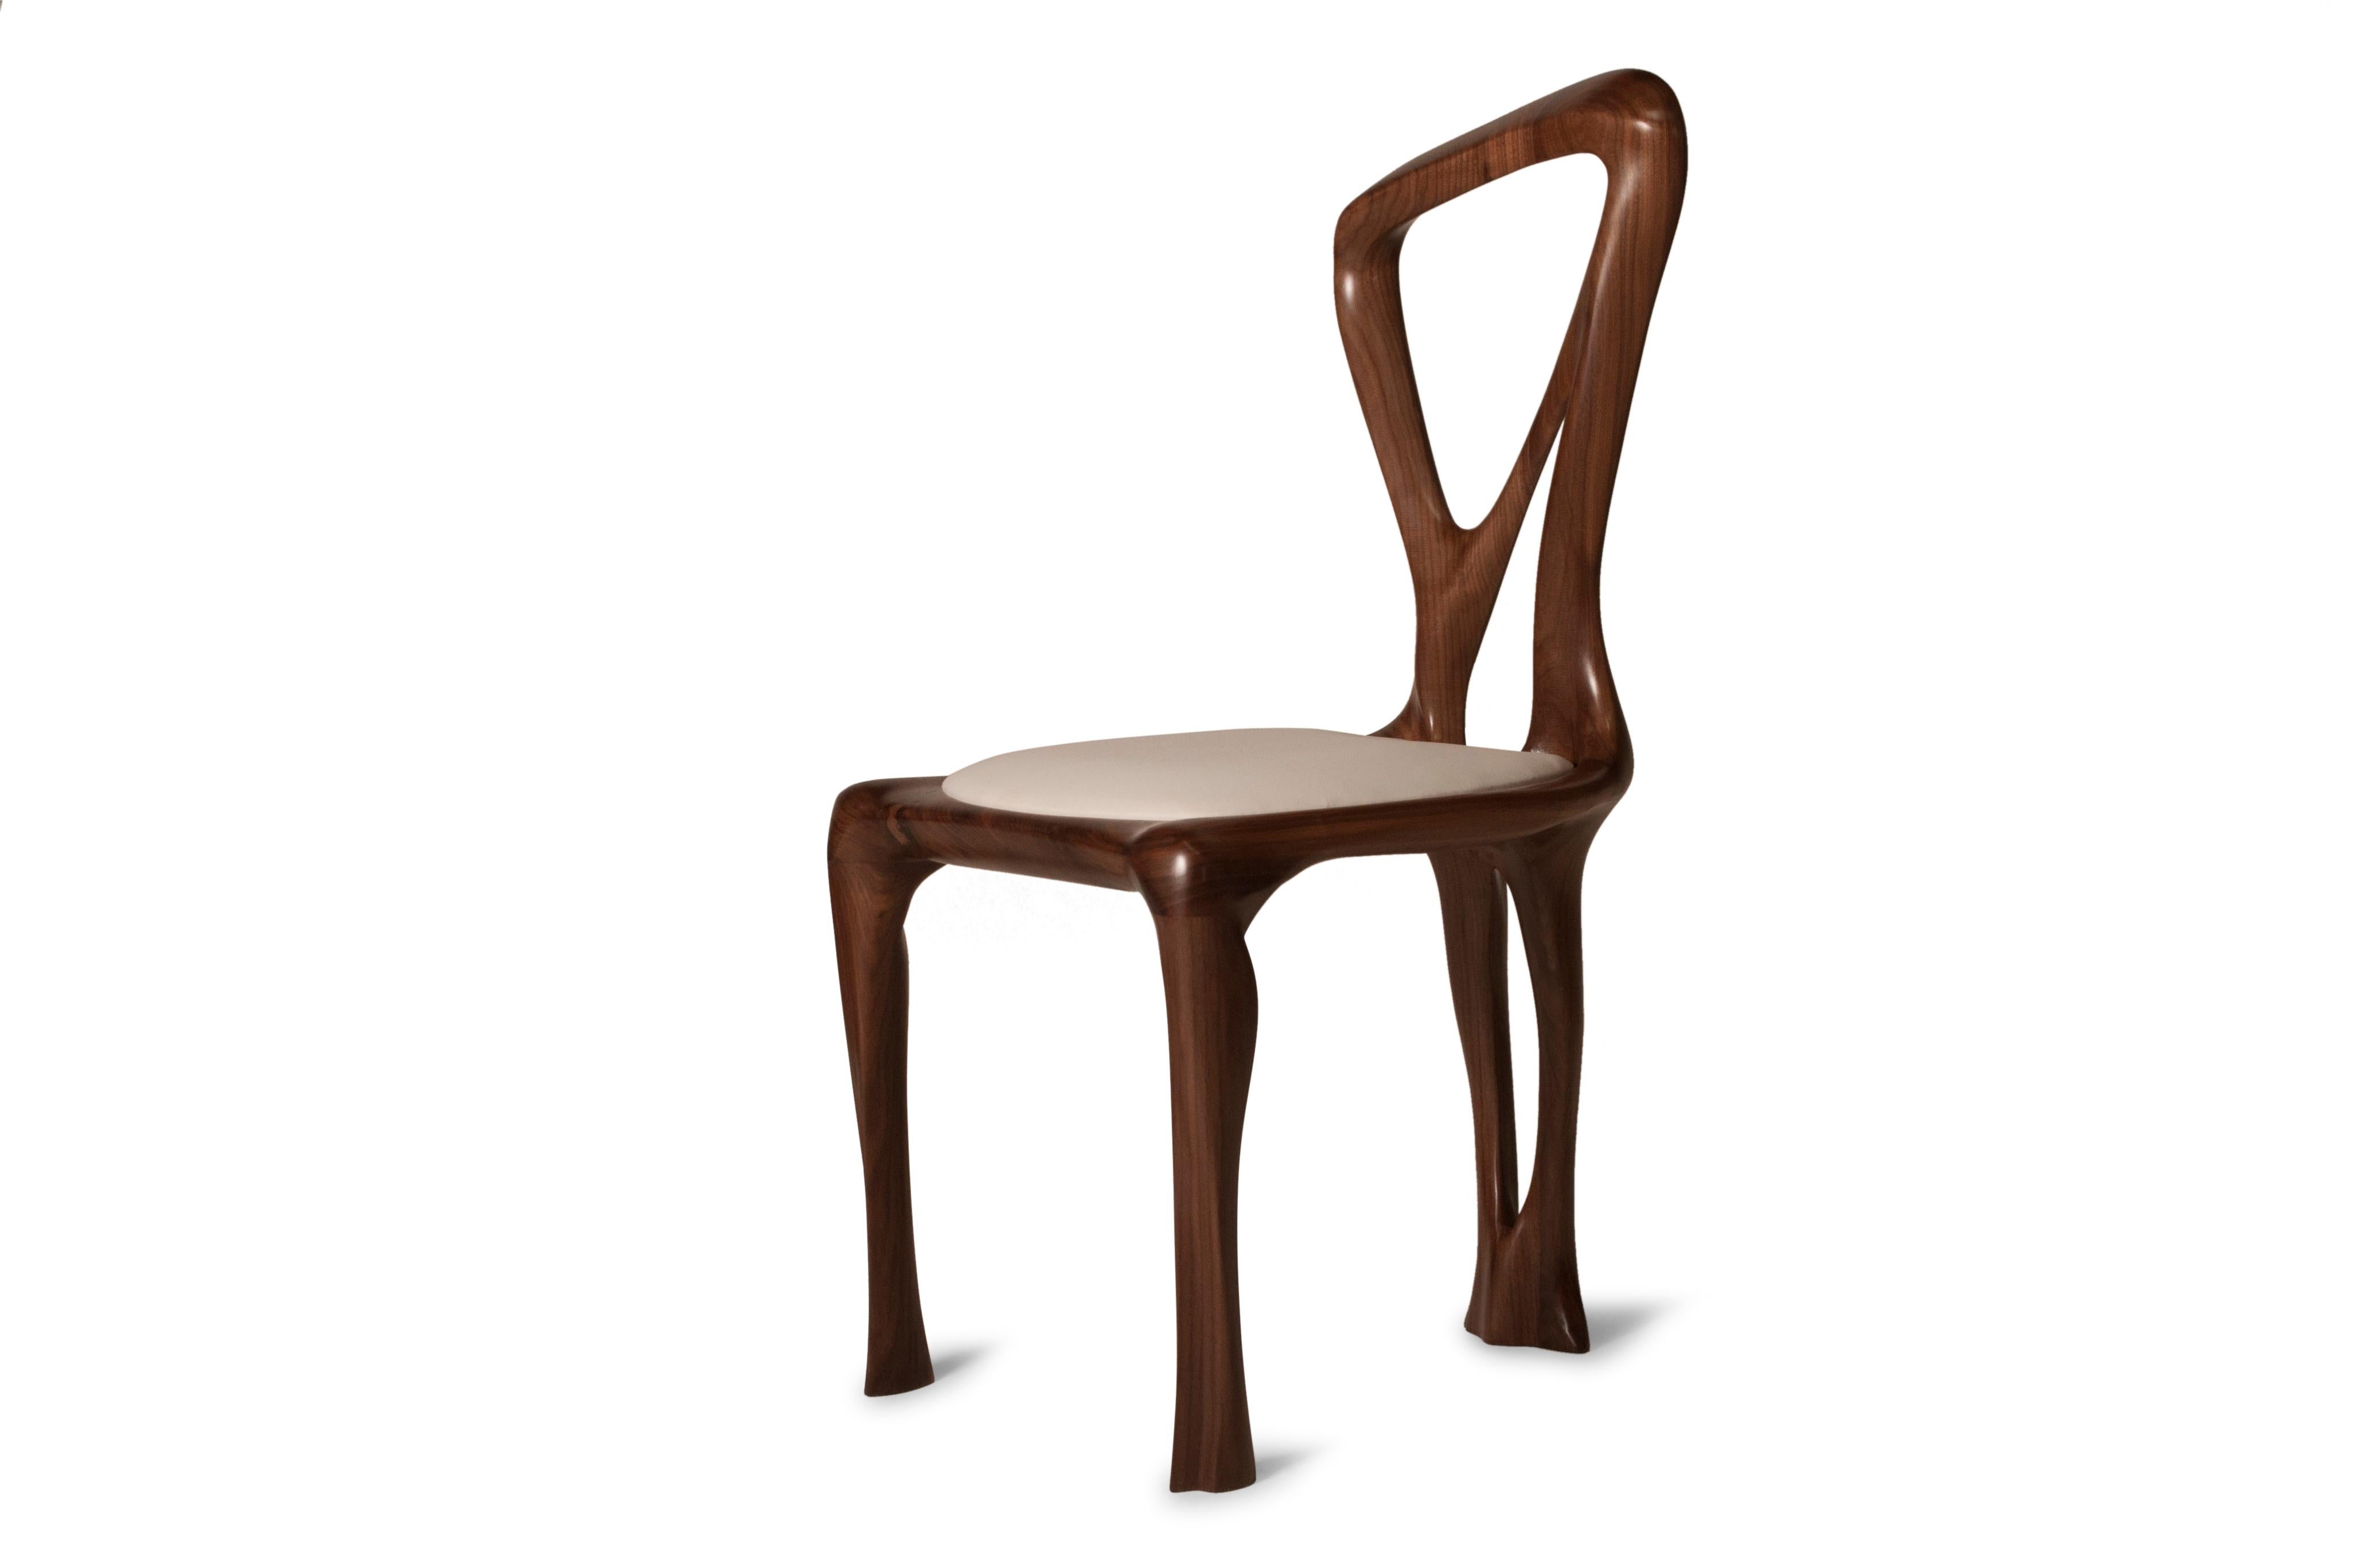 Amorph Gazelle Dining Chair, Solid Walnut, Natural Stain In New Condition For Sale In Los Angeles, CA